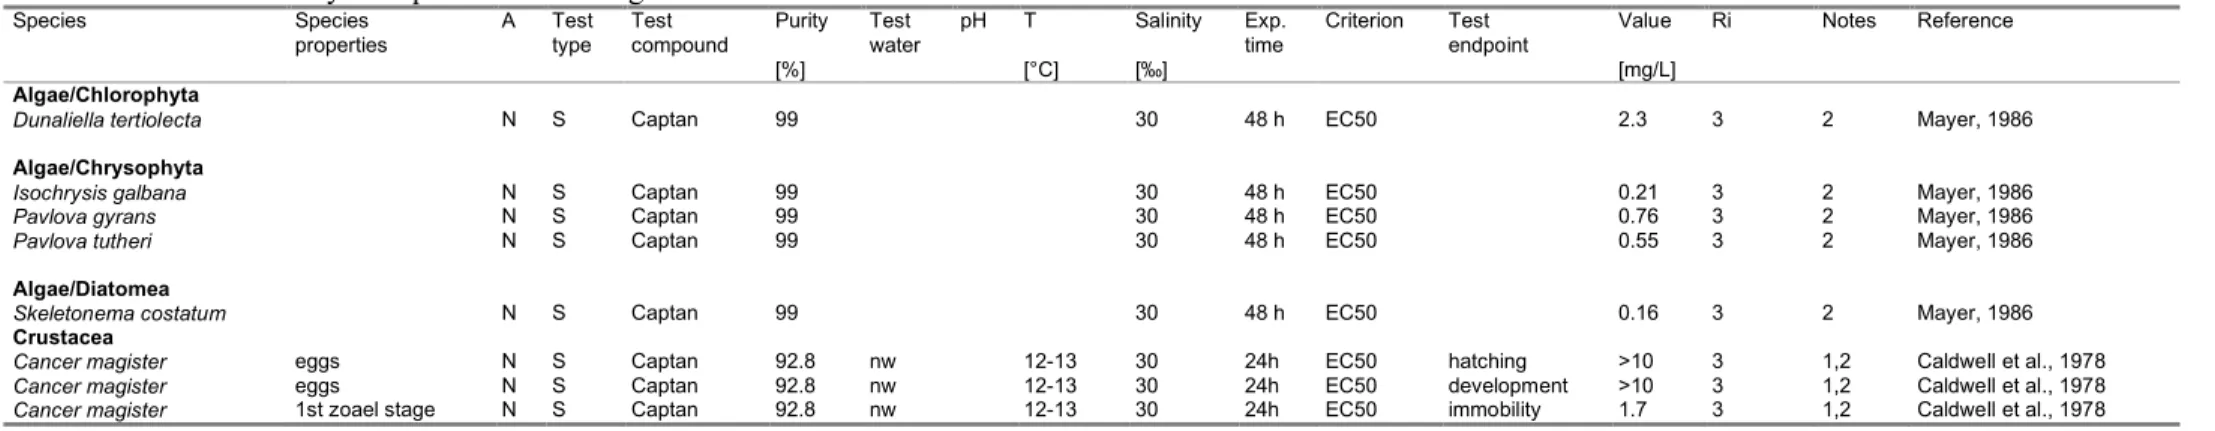 Table A2.2. Acute toxicity of captan to marine organisms.  Species        Species   properties    A      Test type    Test  compound    Purity   [%]  Test  water    pH      T    [°C]  Salinity [‰]  Exp